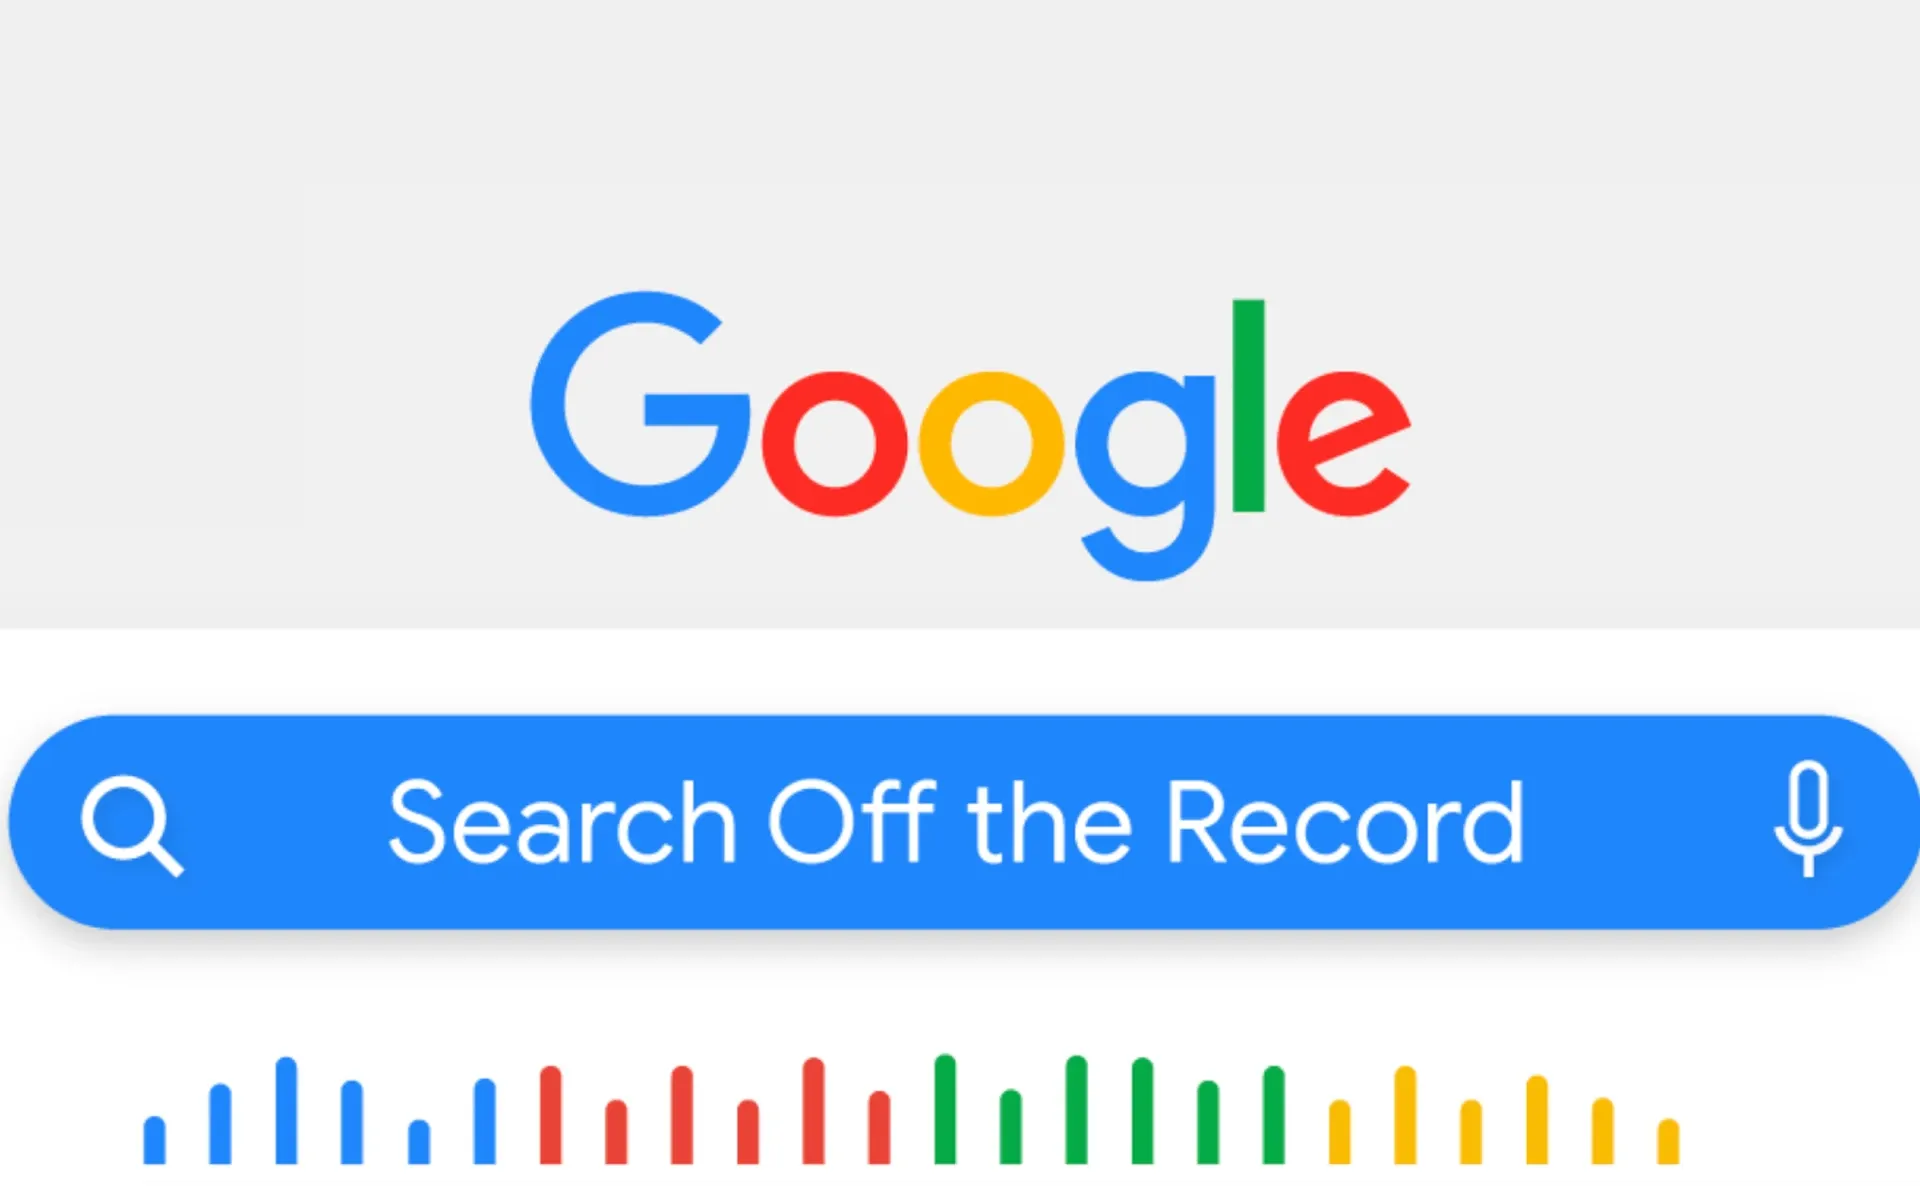 Search Off the Record